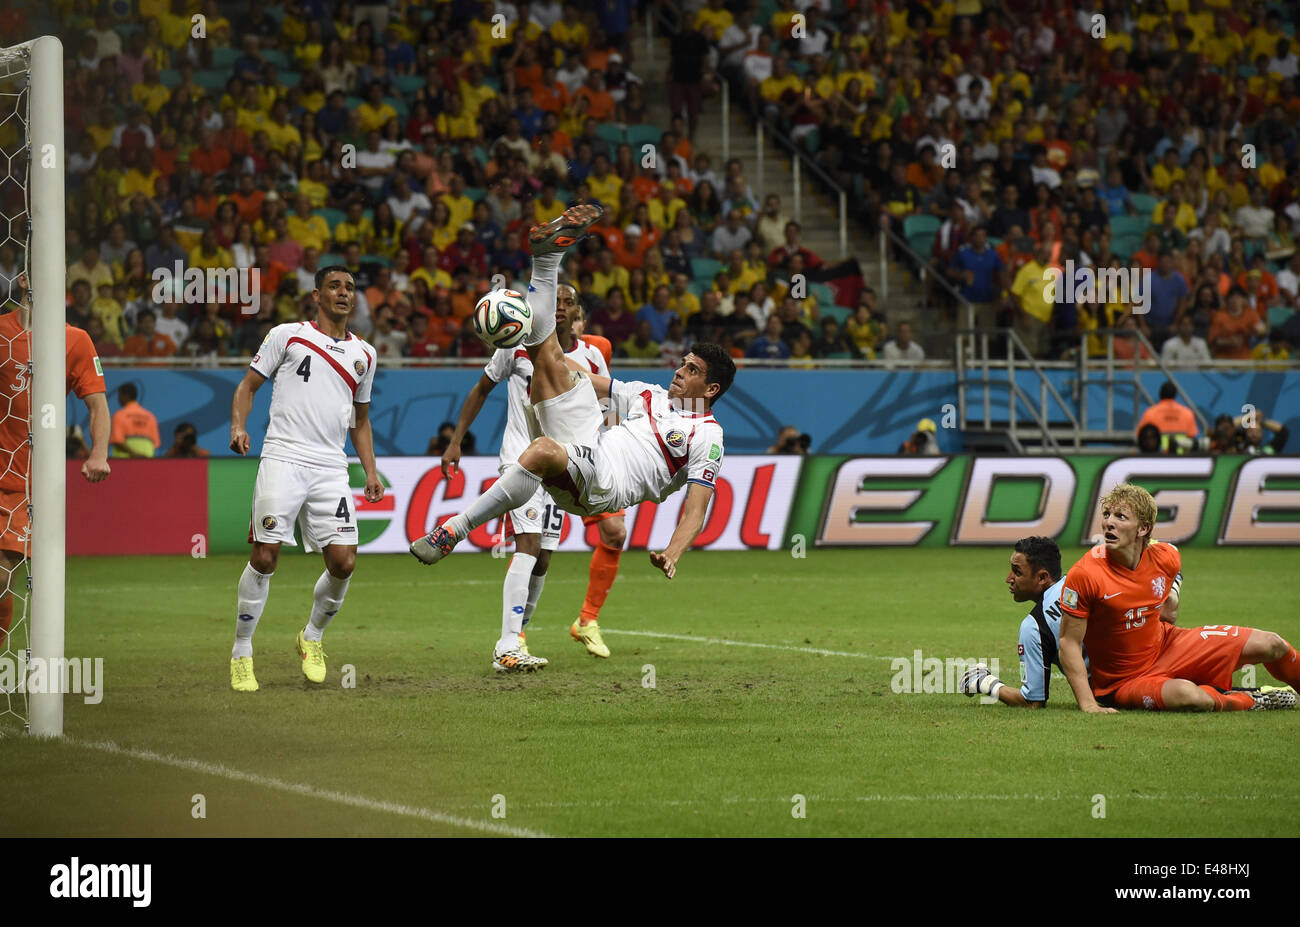 Salvador, Brazil. 5th July, 2014. Costa Rica's Johnny Acosta (C) vies for the ball during a quarter-finals match between Netherlands and Costa Rica of 2014 FIFA World Cup at the Arena Fonte Nova Stadium in Salvador, Brazil, on July 5, 2014. Credit:  Lui Siu Wai/Xinhua/Alamy Live News Stock Photo